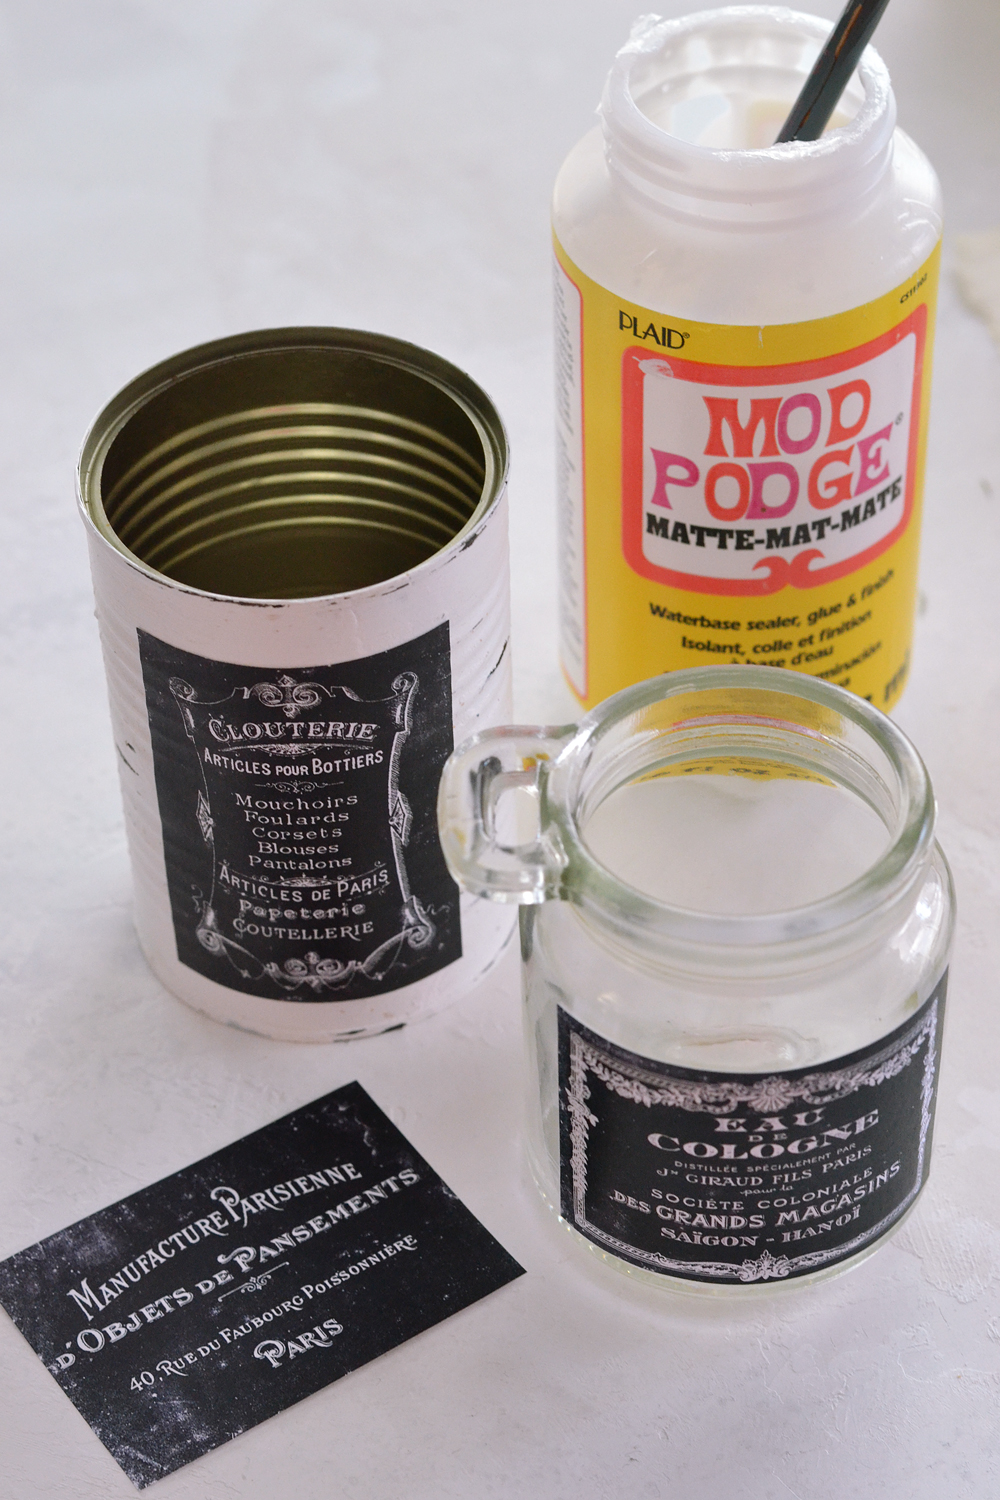 Gluing labels to cans and jars